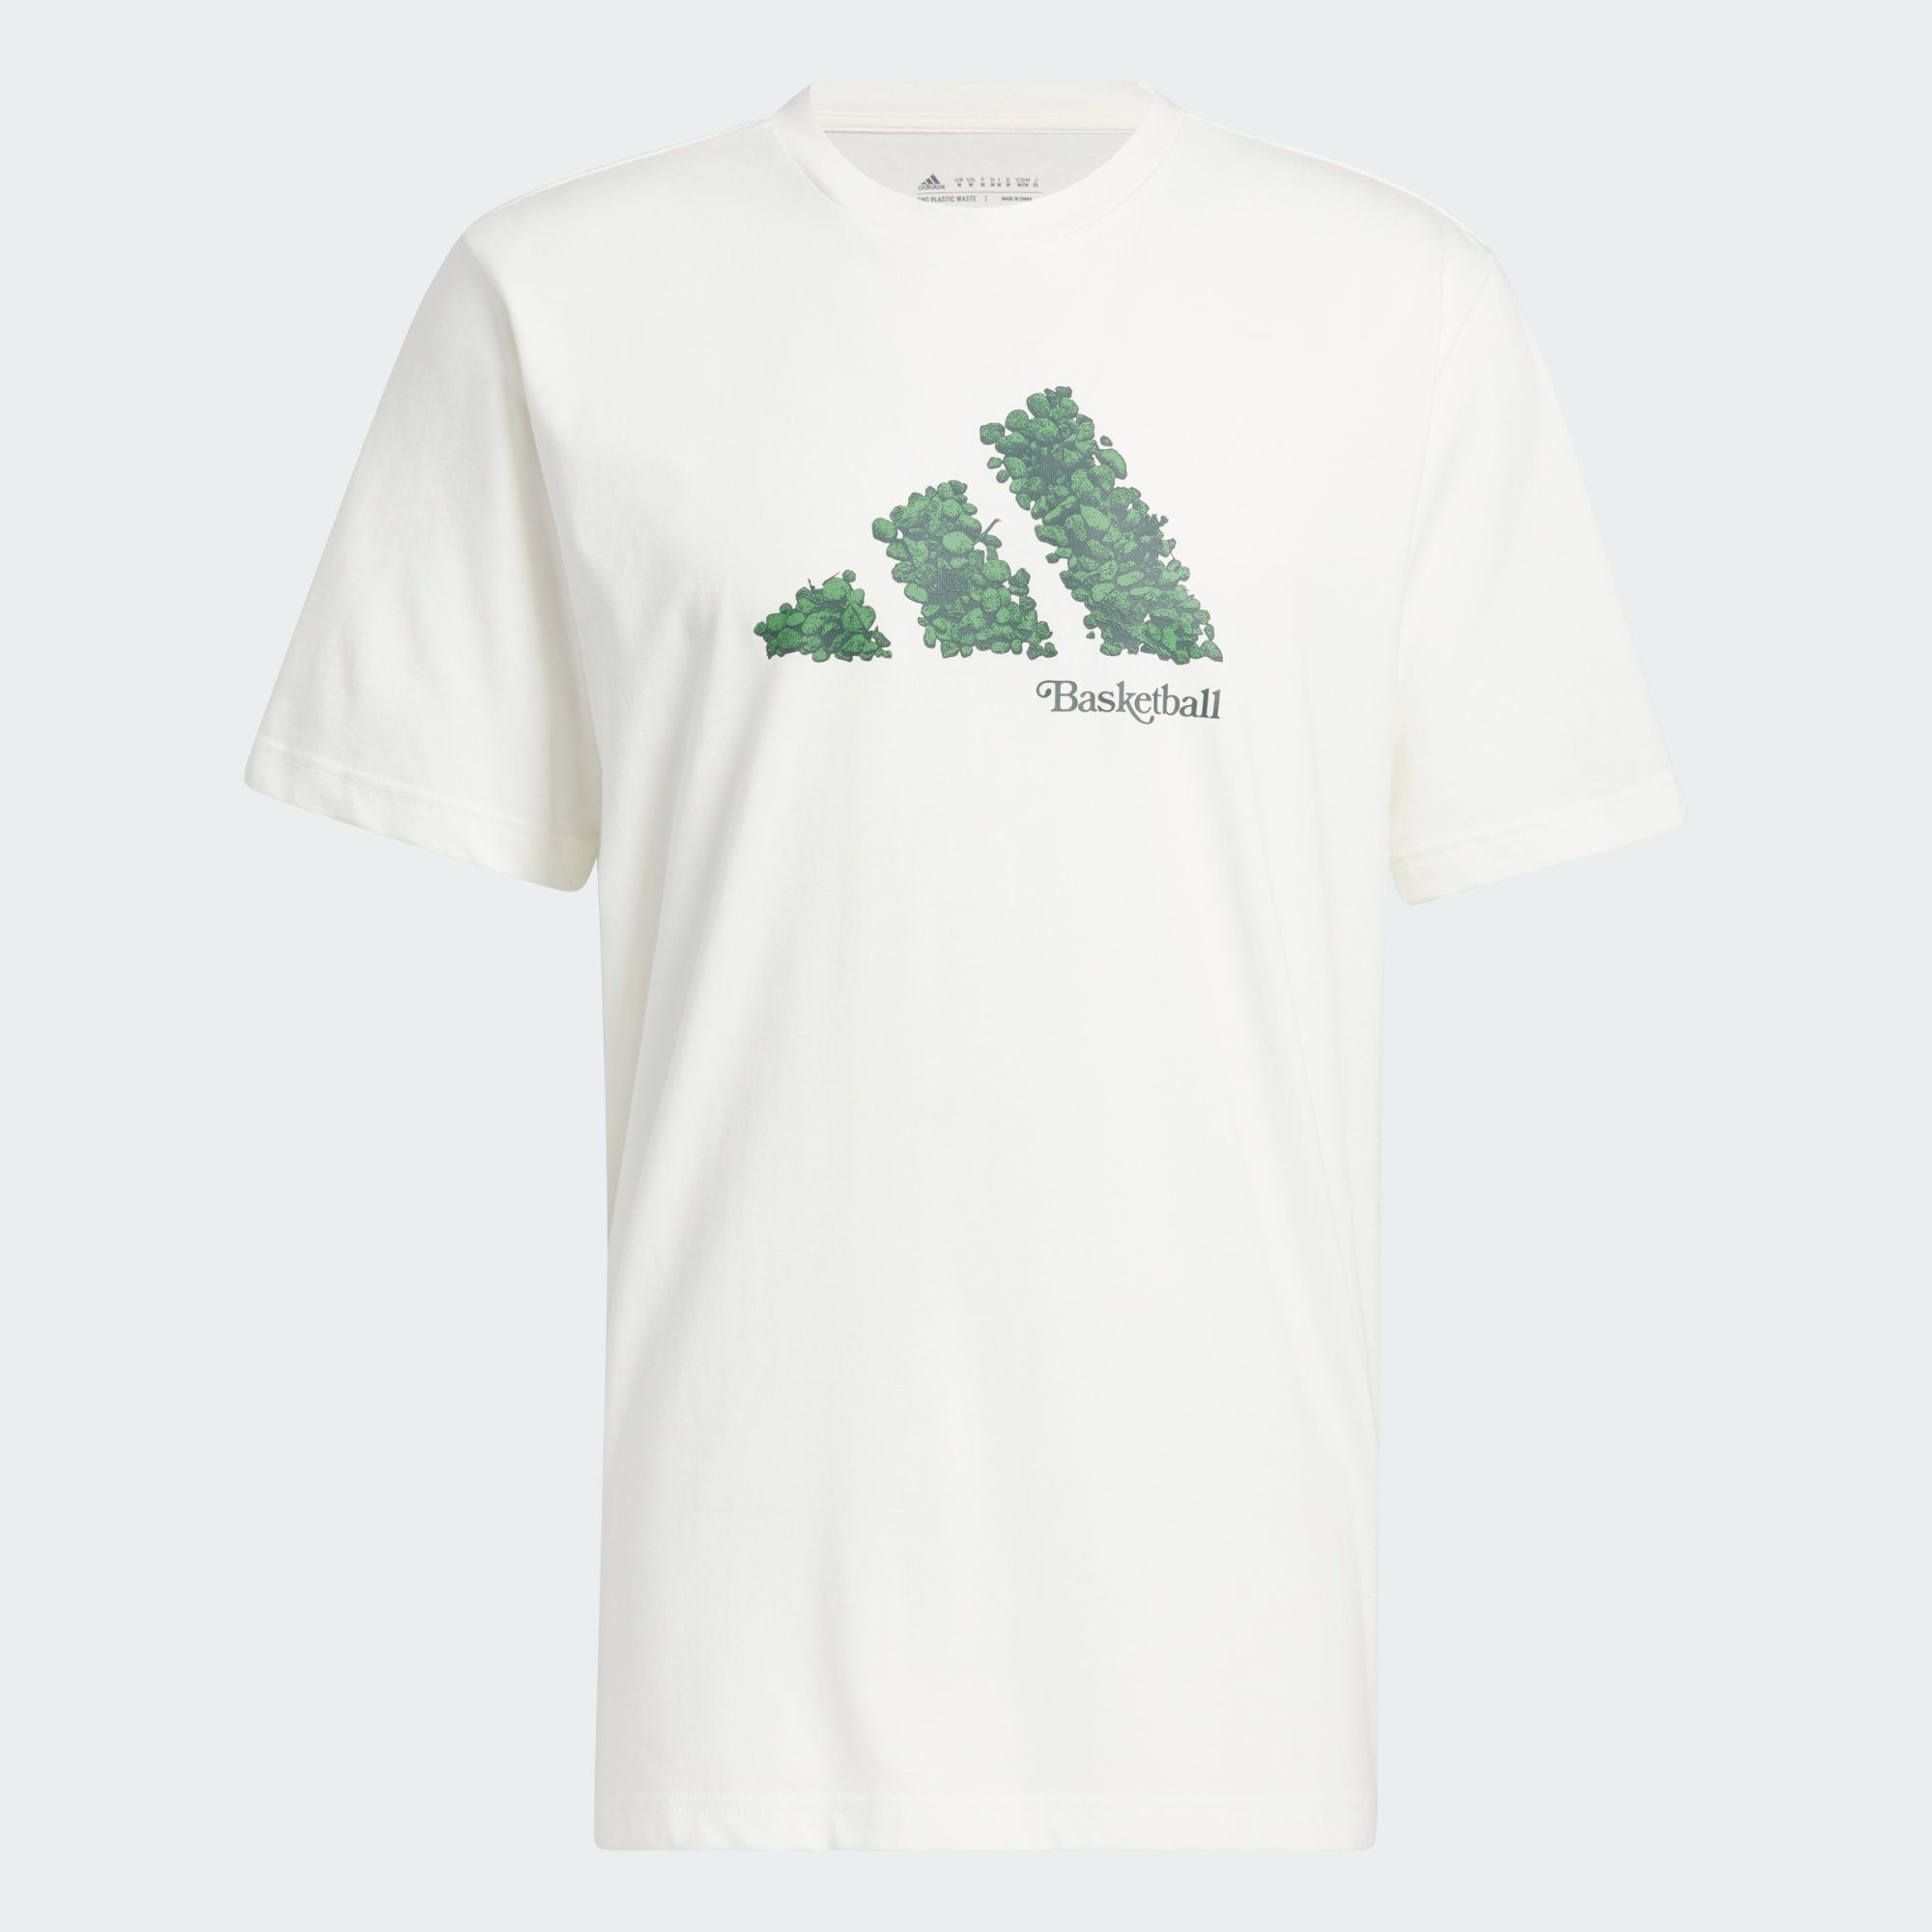 T-SHIRT Funktionsshirt adidas Performance GRAPHIC COURT THERAPY